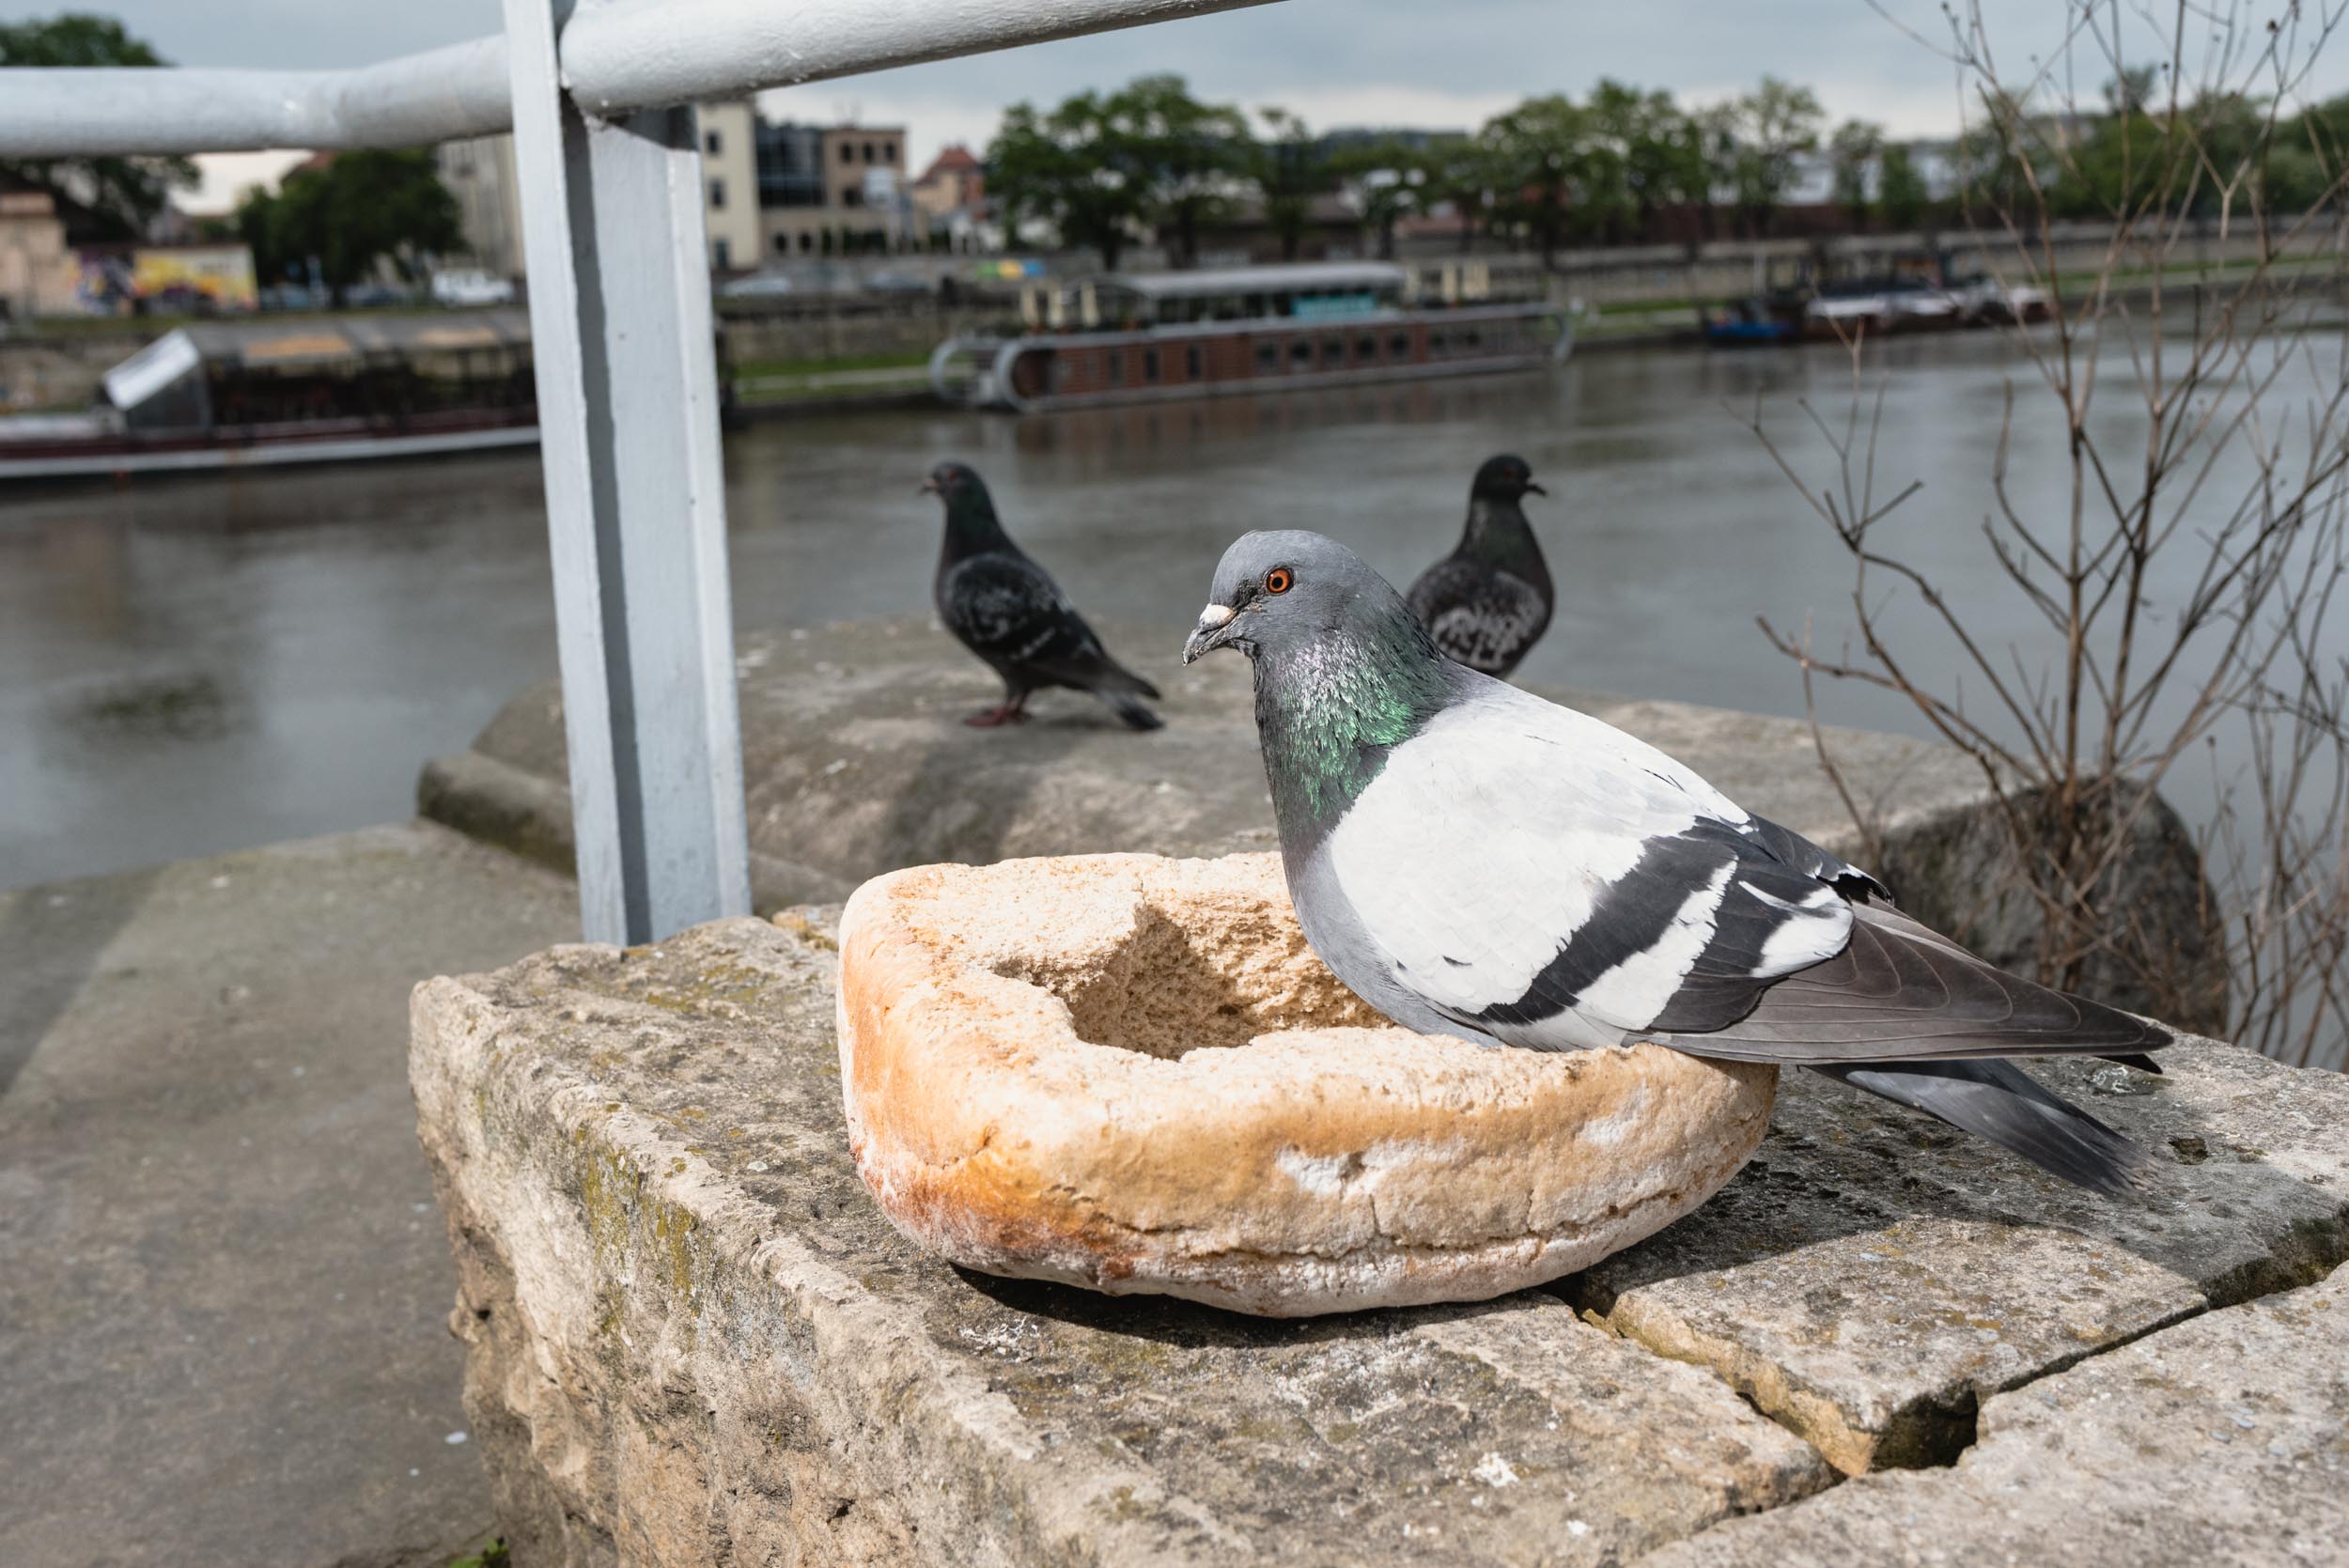 Pigeon sitting in bread bowl